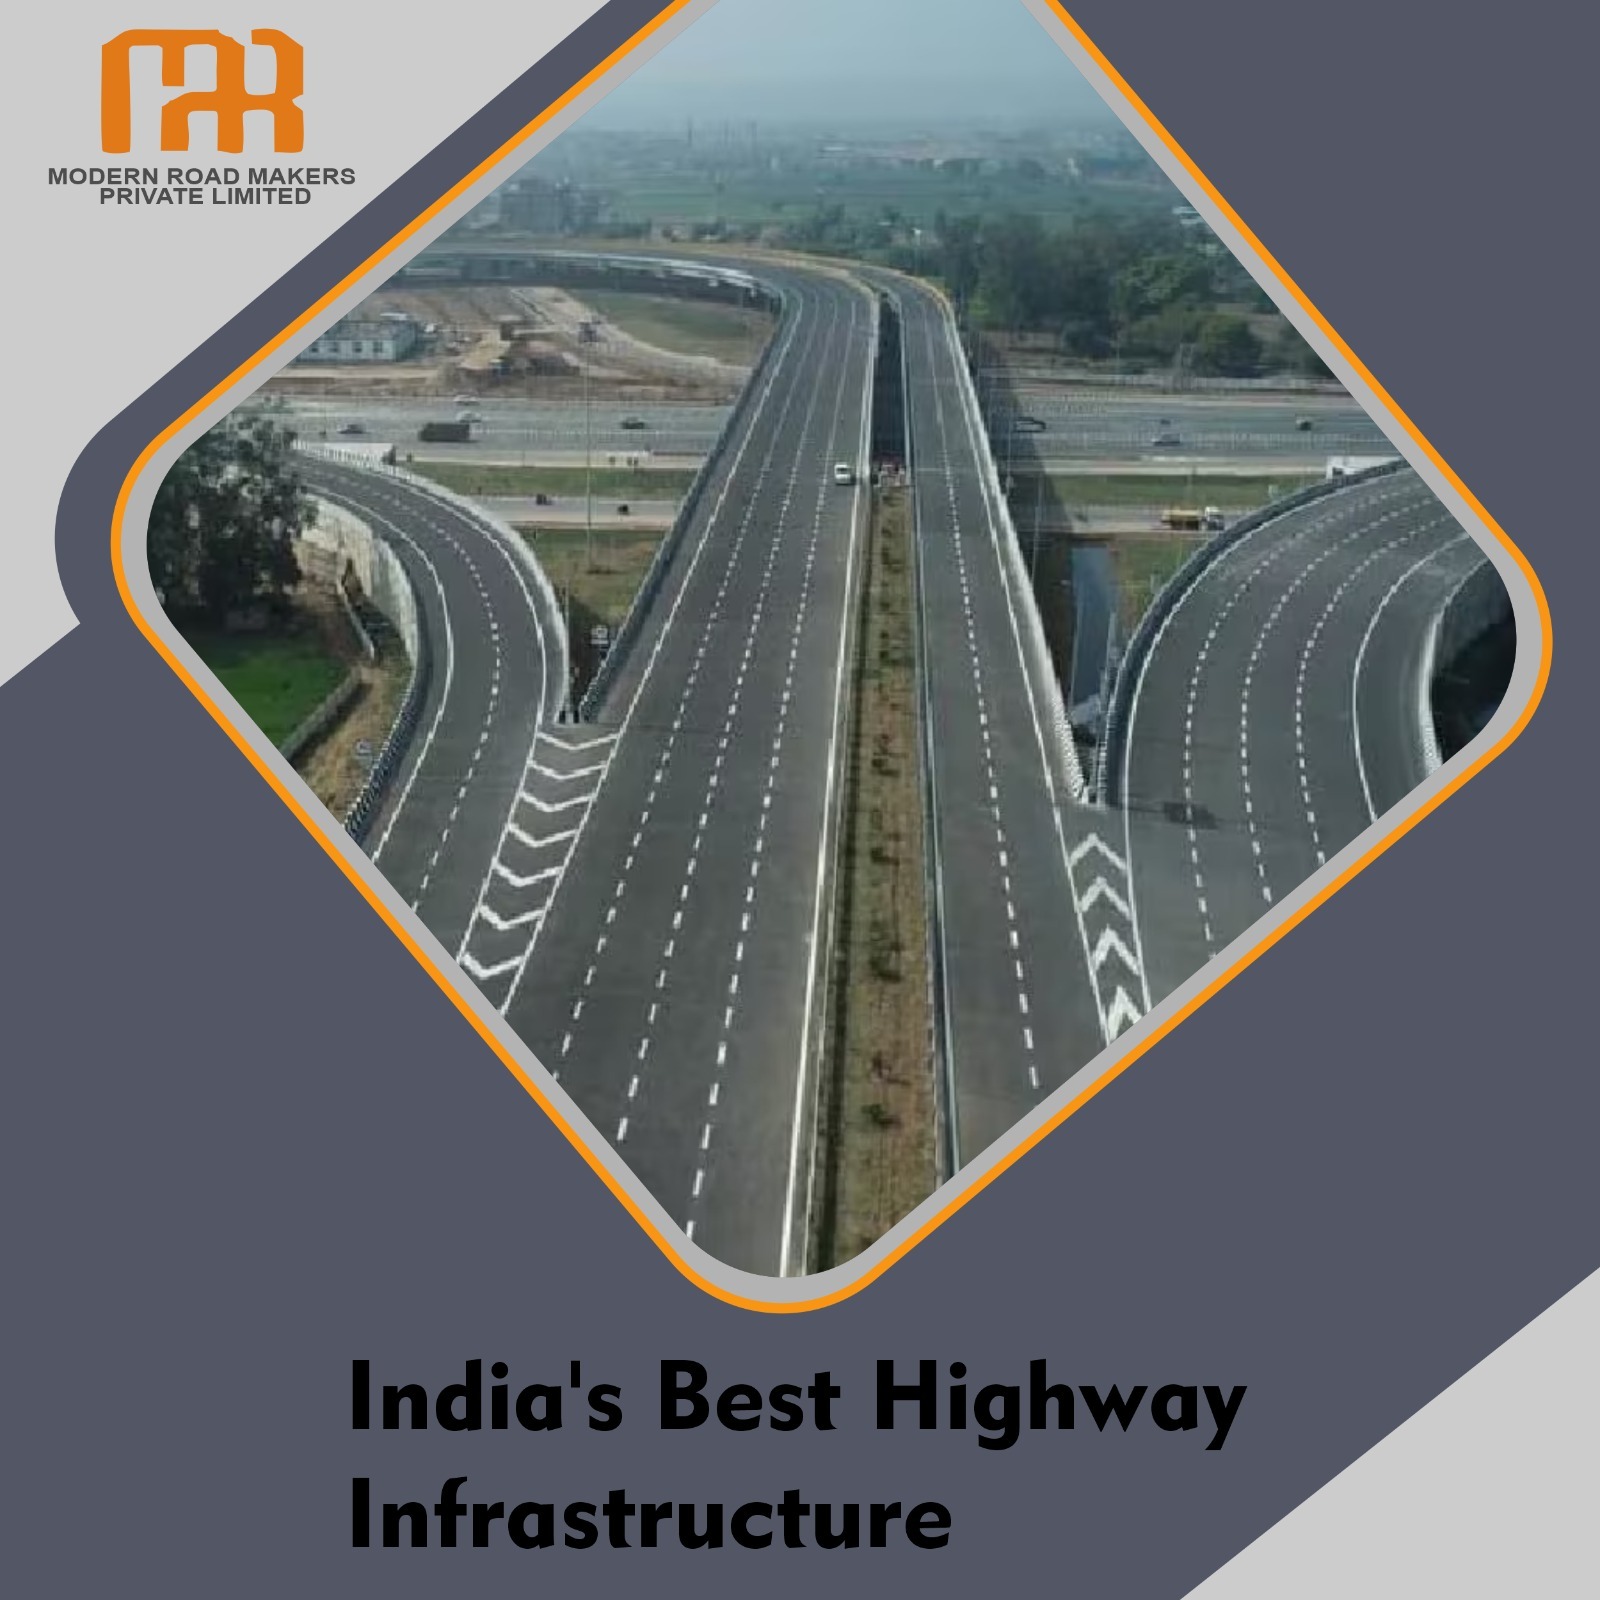 Which is the India's Best Highway Infrastructure company?